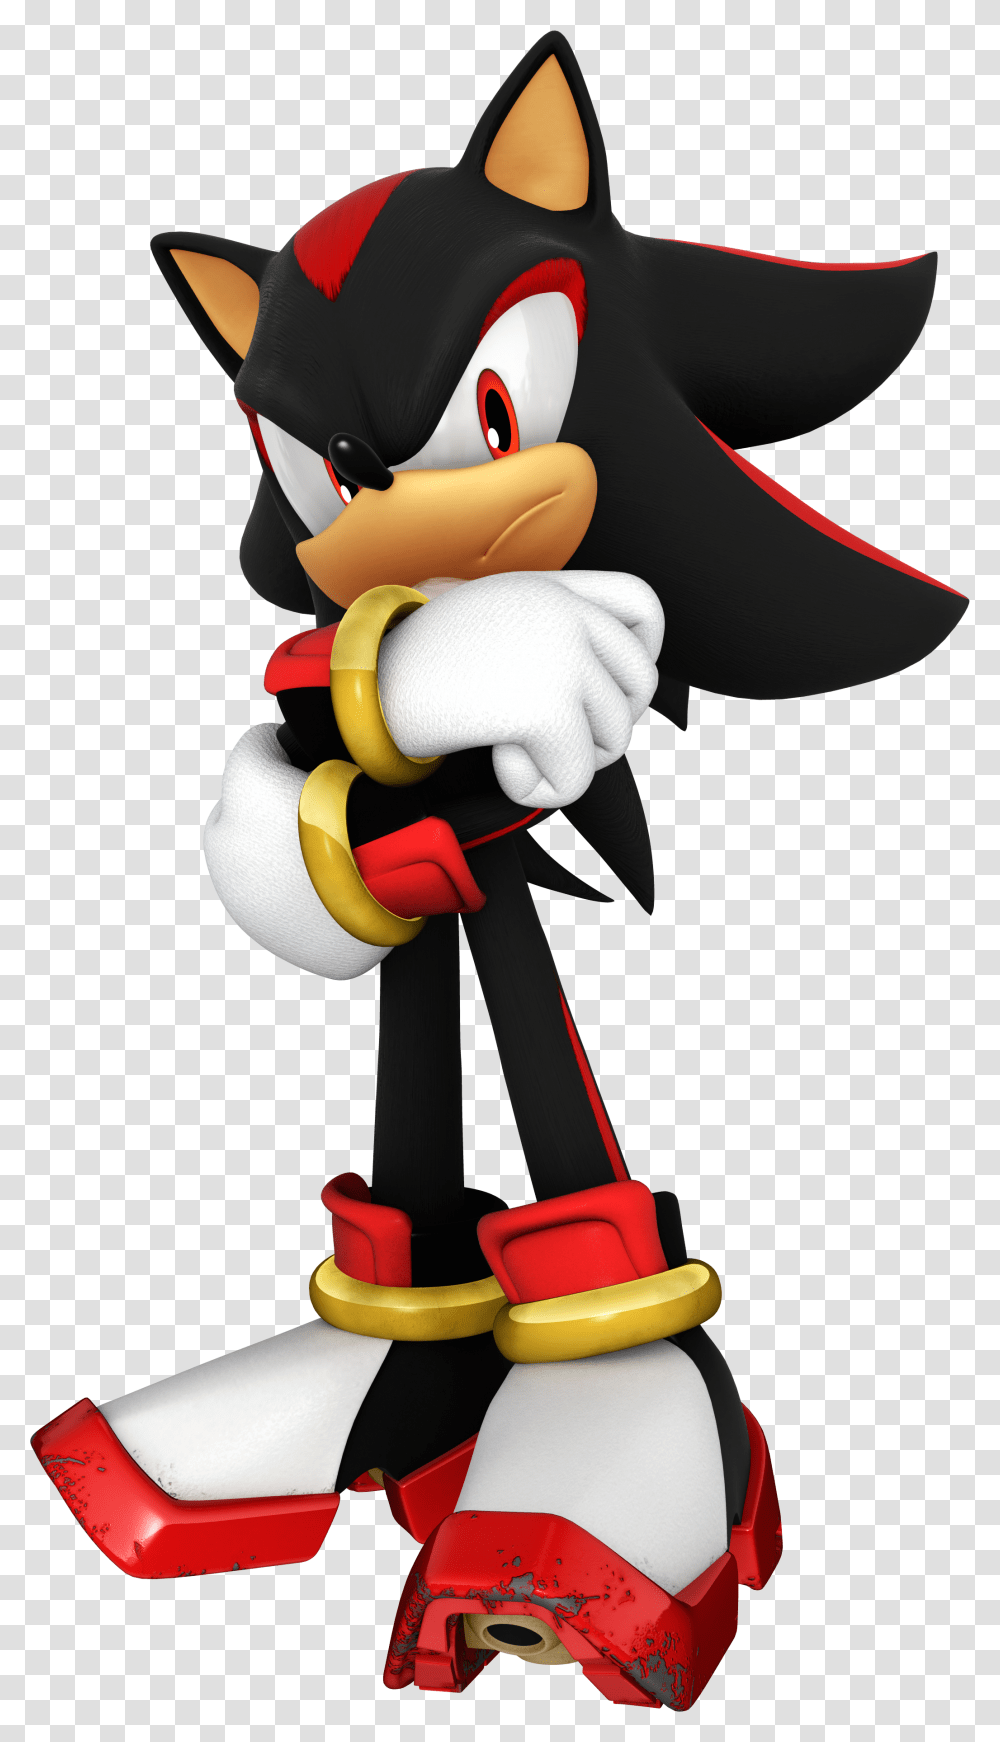 Shadow The Hedgehog From The Sonic Series, Toy, Nutcracker, Figurine, Pirate Transparent Png